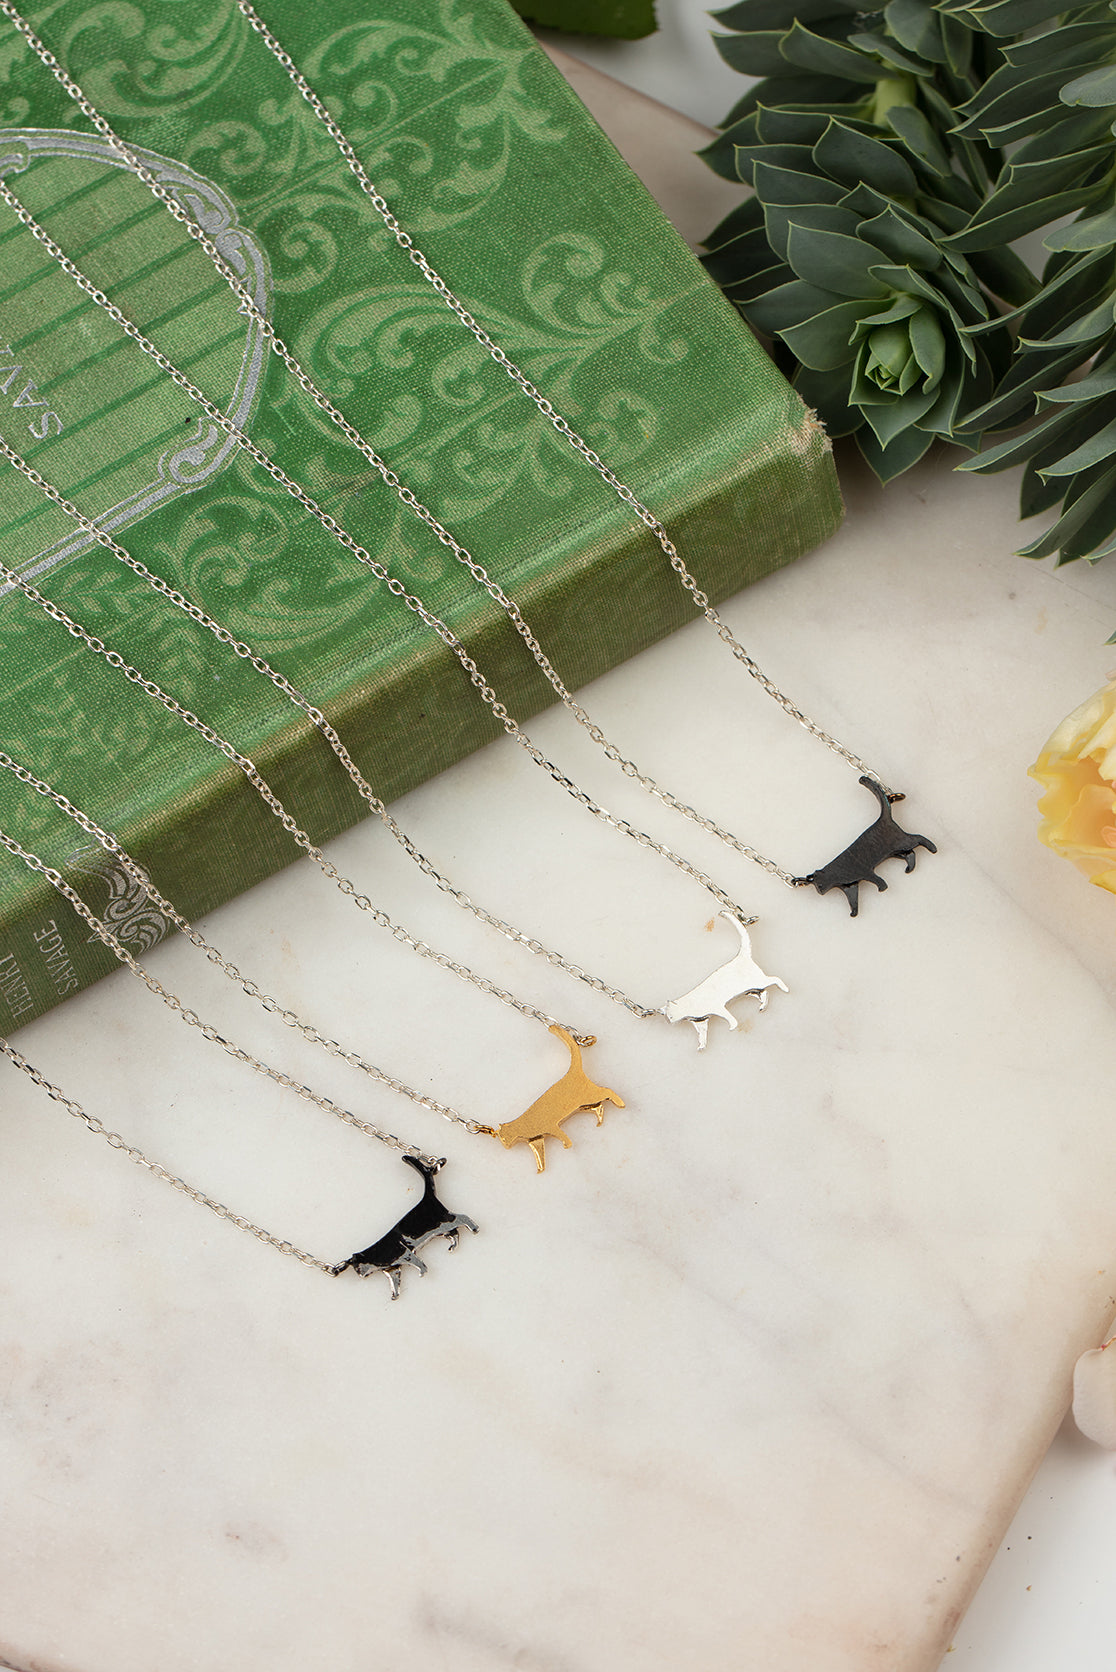 Walking Cat Necklace In Silver, Goldplate, Black or Black &amp; White